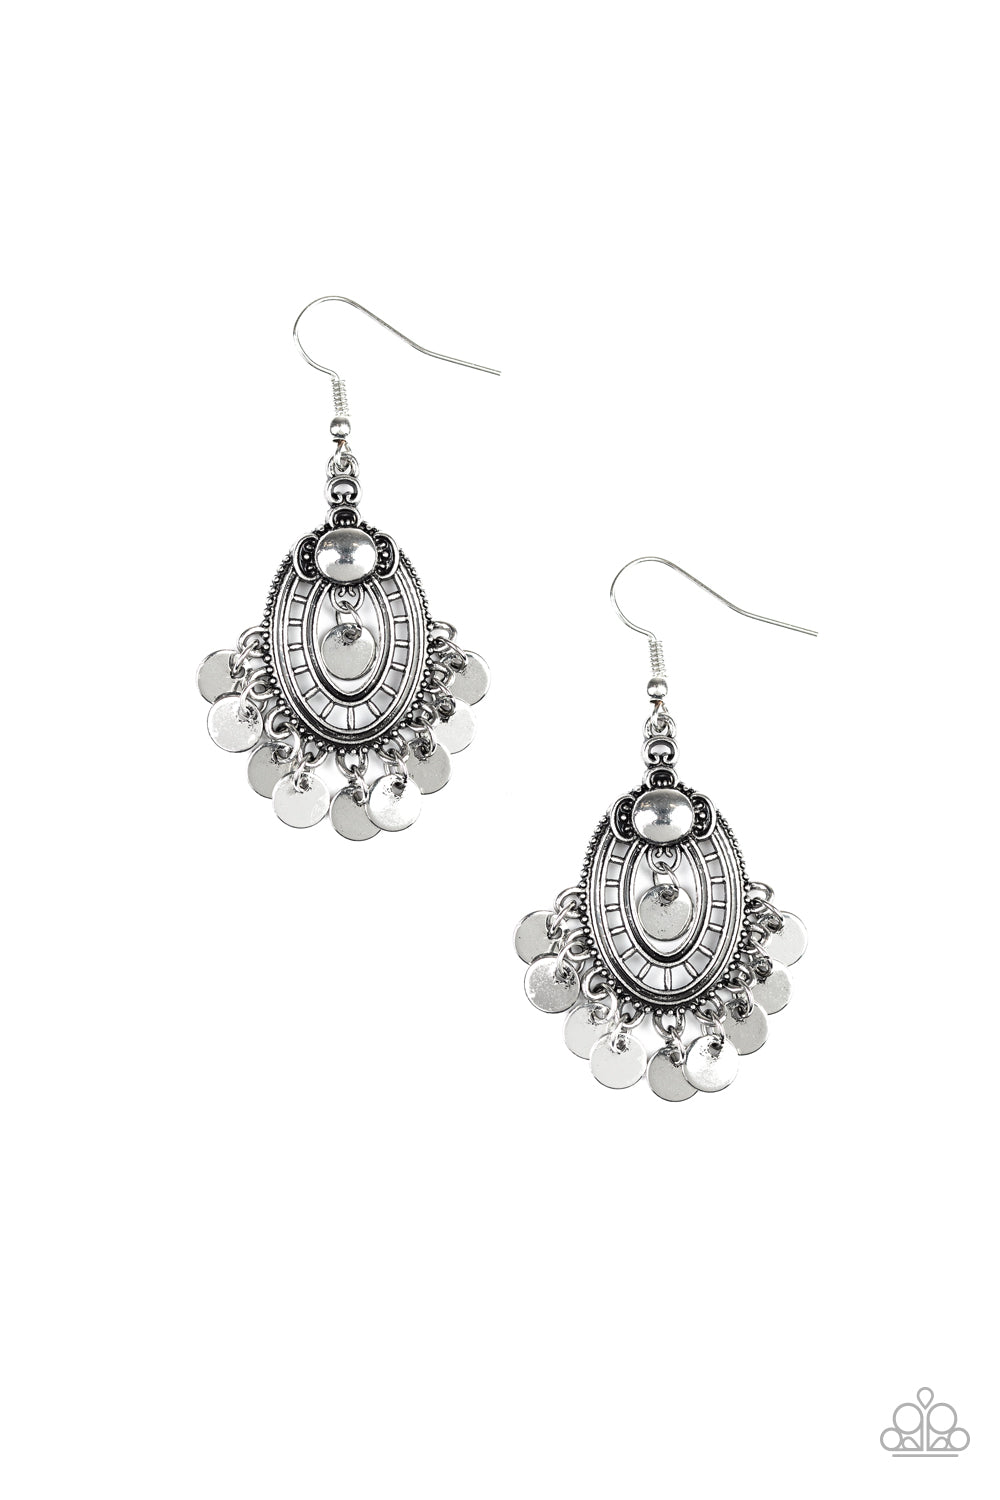 Paparazzi Earrings - Chime Chic - Silver